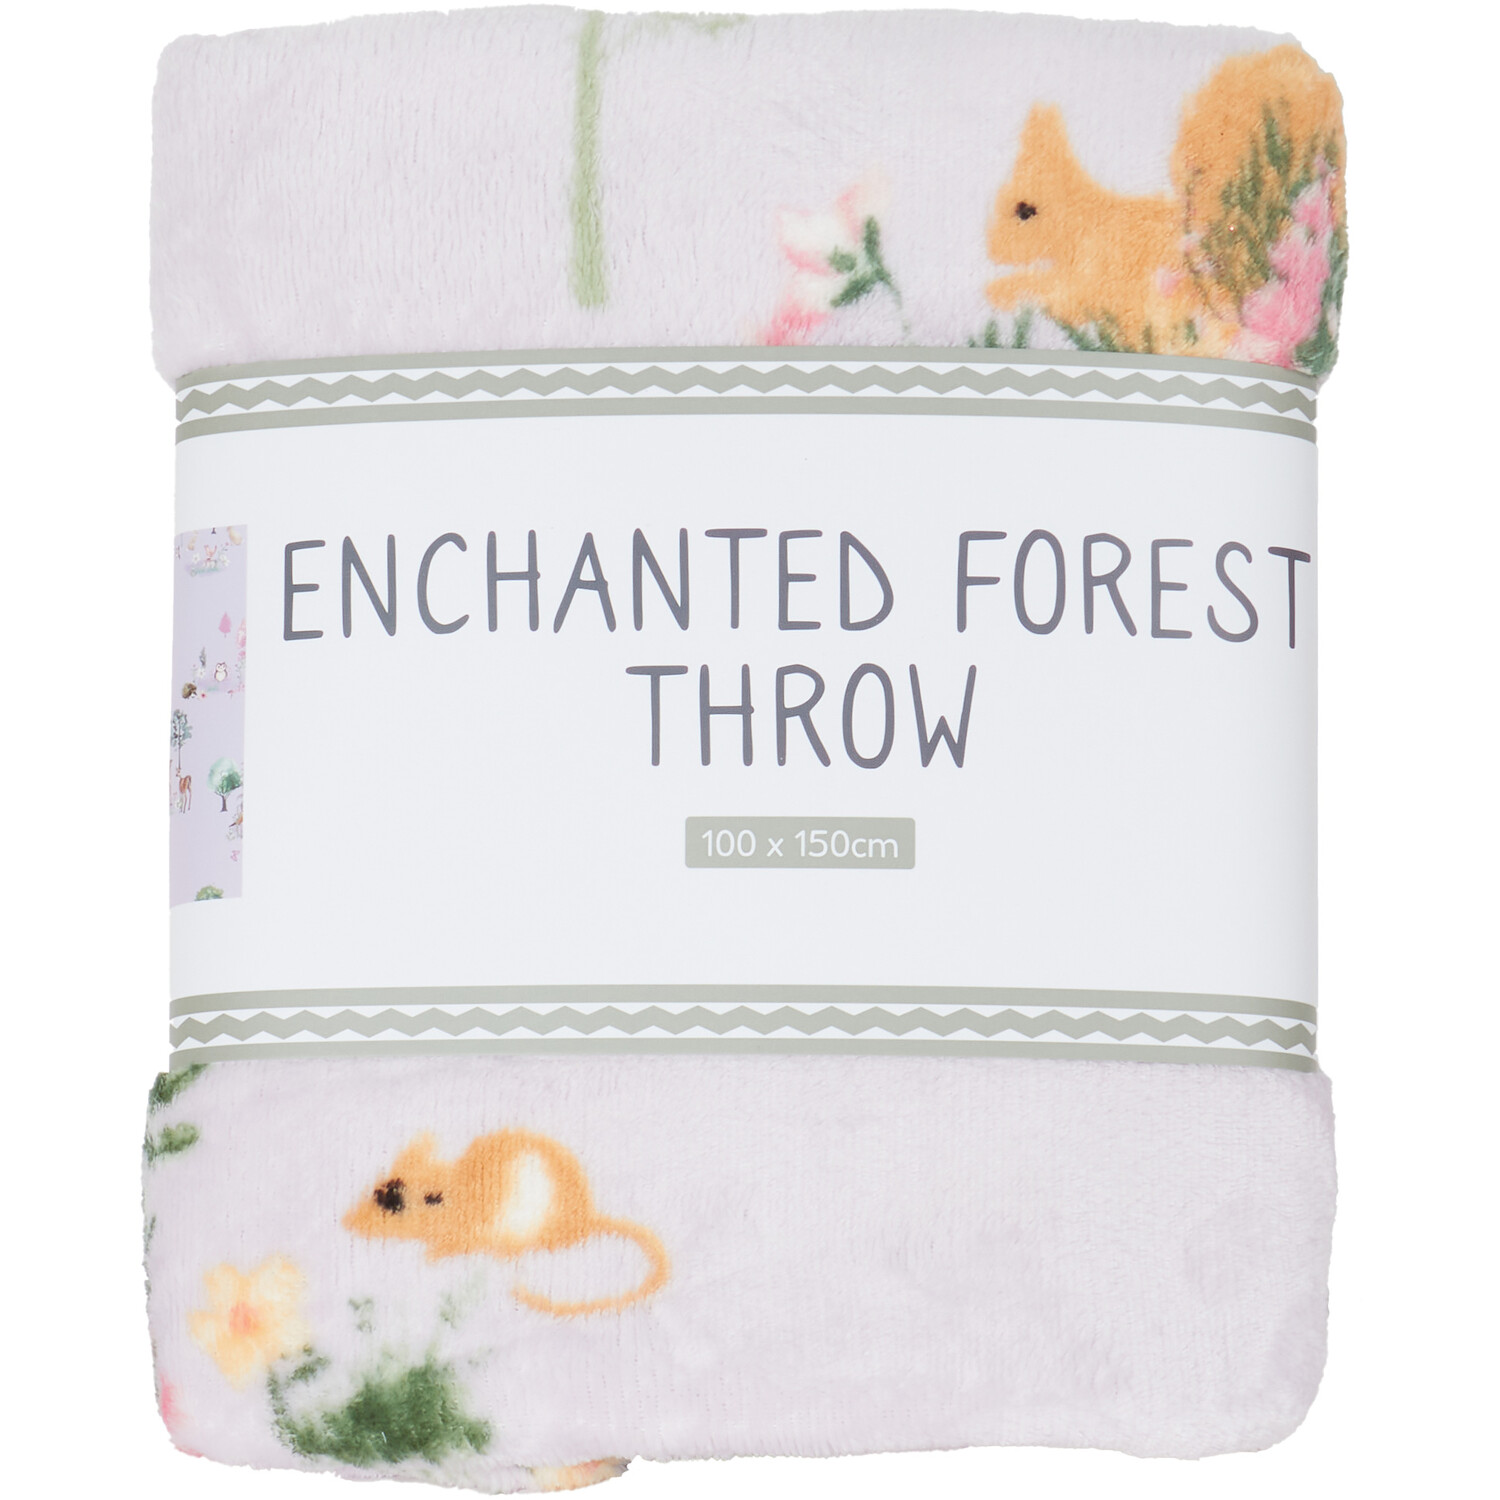 Enchanted Forest Throw - White Image 1